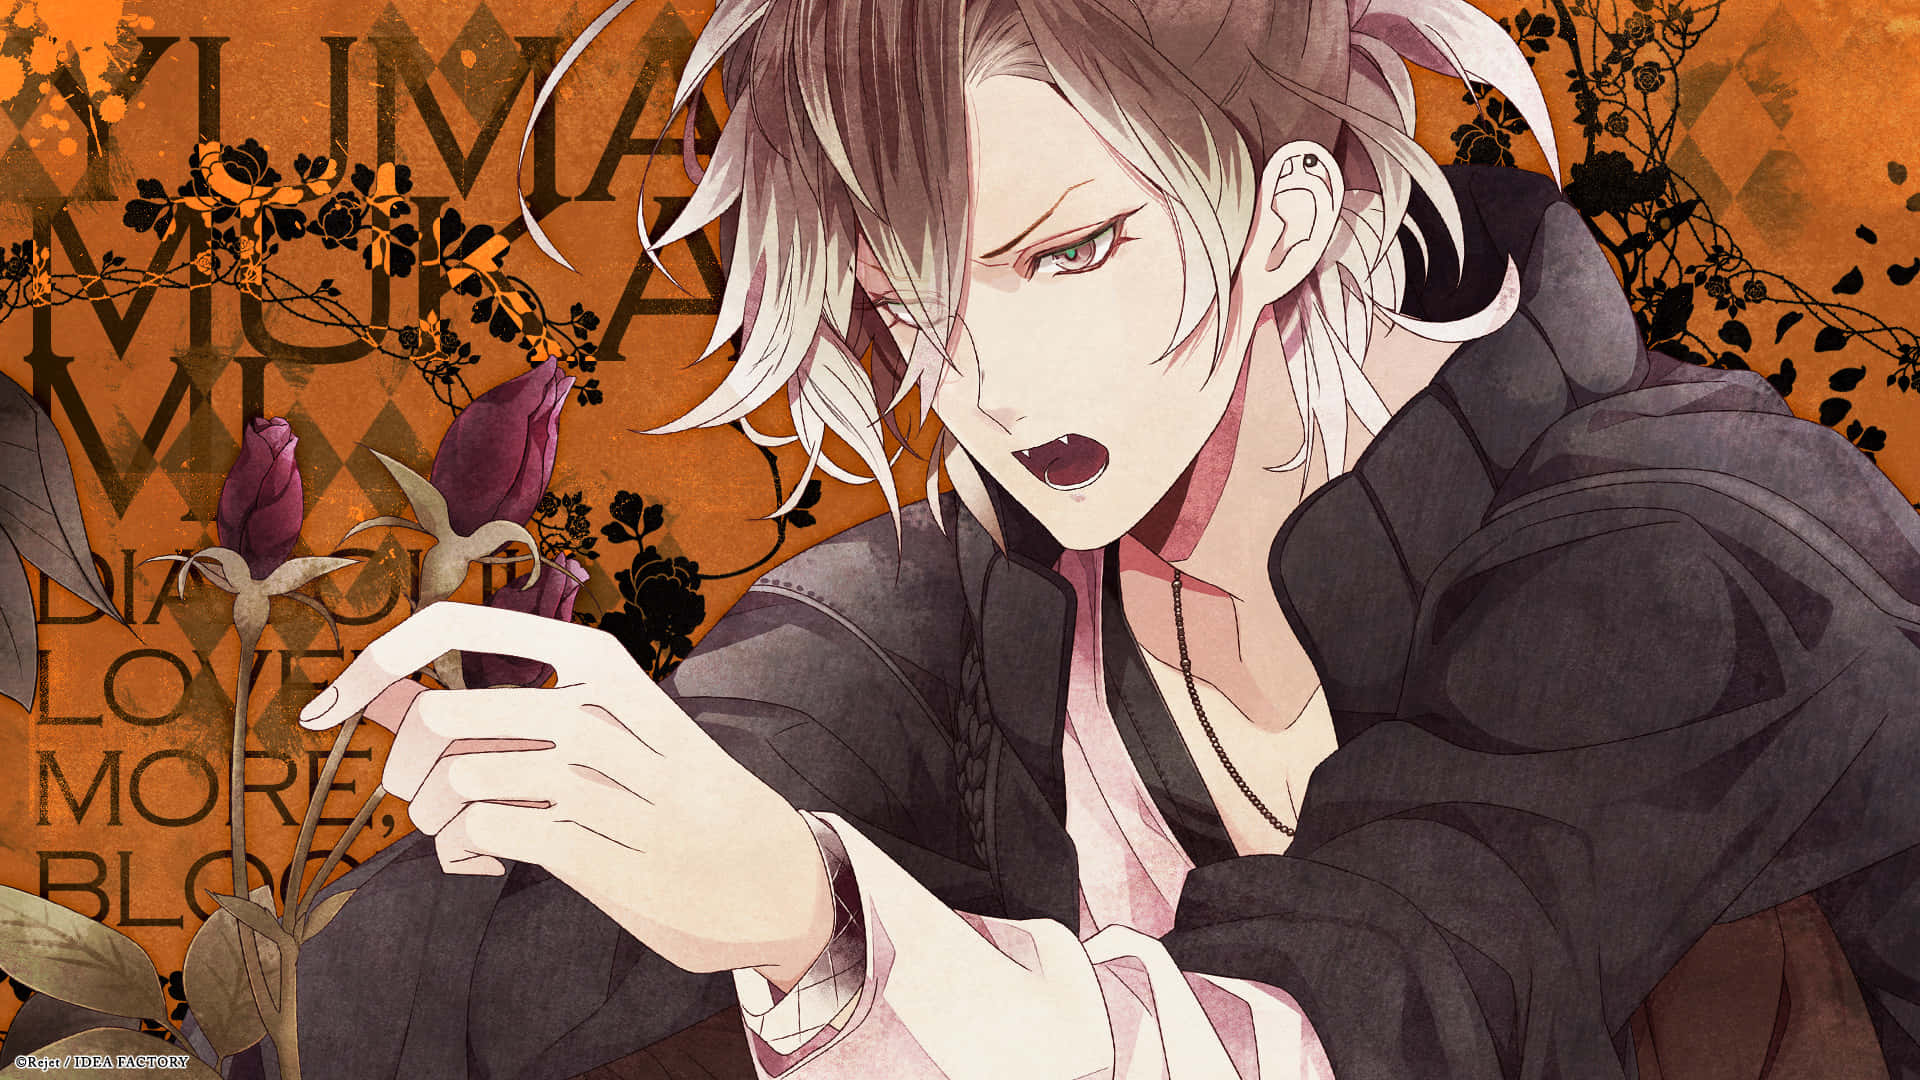 "A Journey Into The Unknown - Join the Cast of Diabolik Lovers Now!"